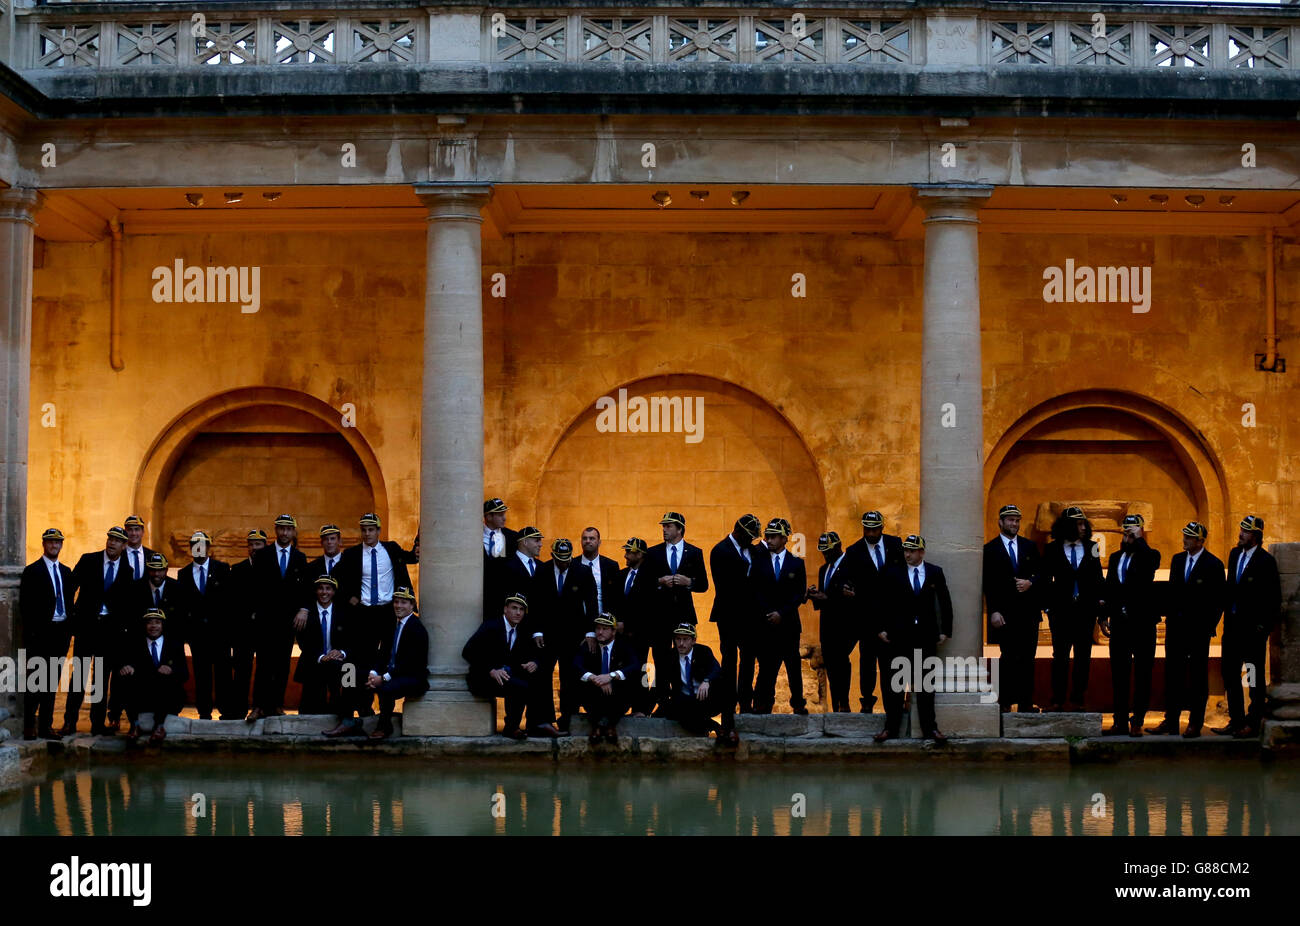 The Australia team pose for a photograph at the Baths after the welcome ceremony at The Assembly Rooms, Bath. Stock Photo